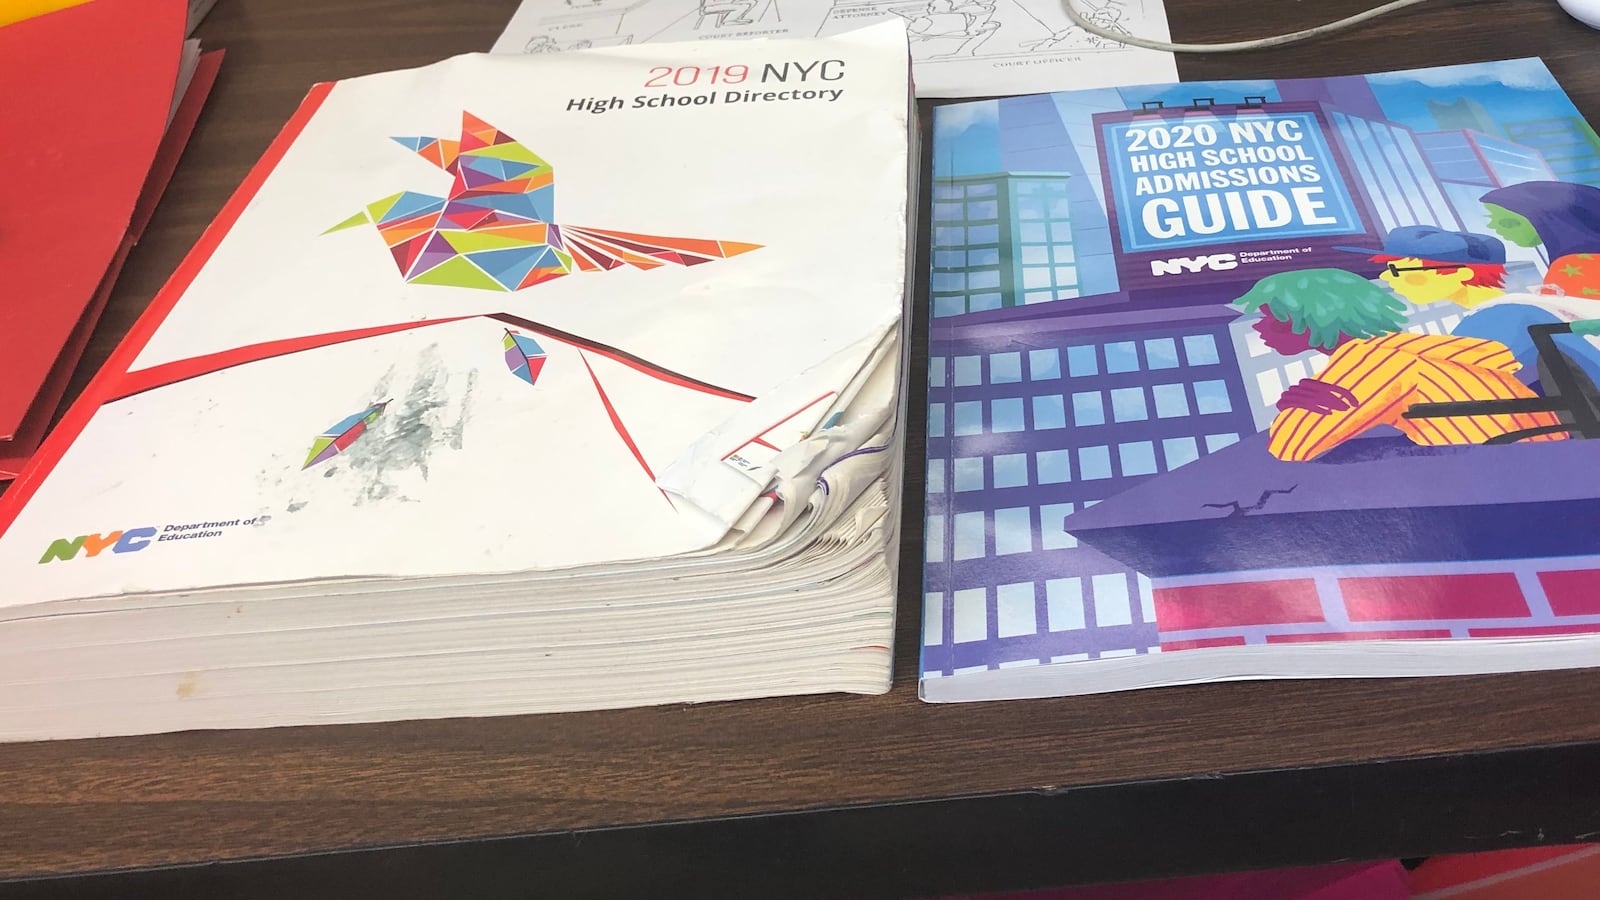 The 2019 and new 2020 high school directory for New York City schools, side by side.